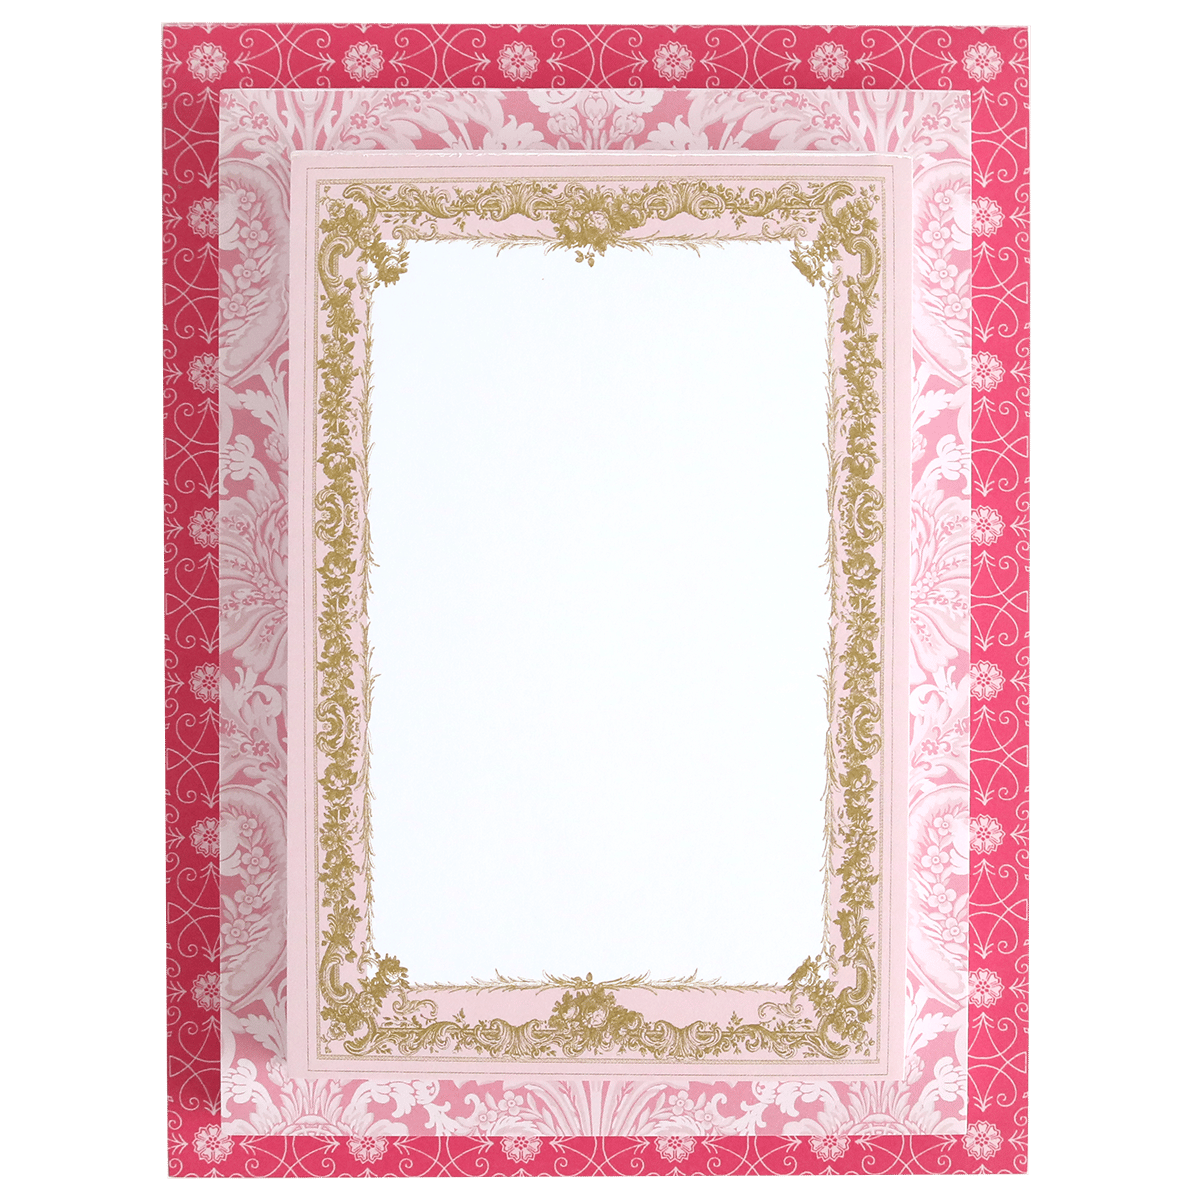 a pink and gold frame on a white background.